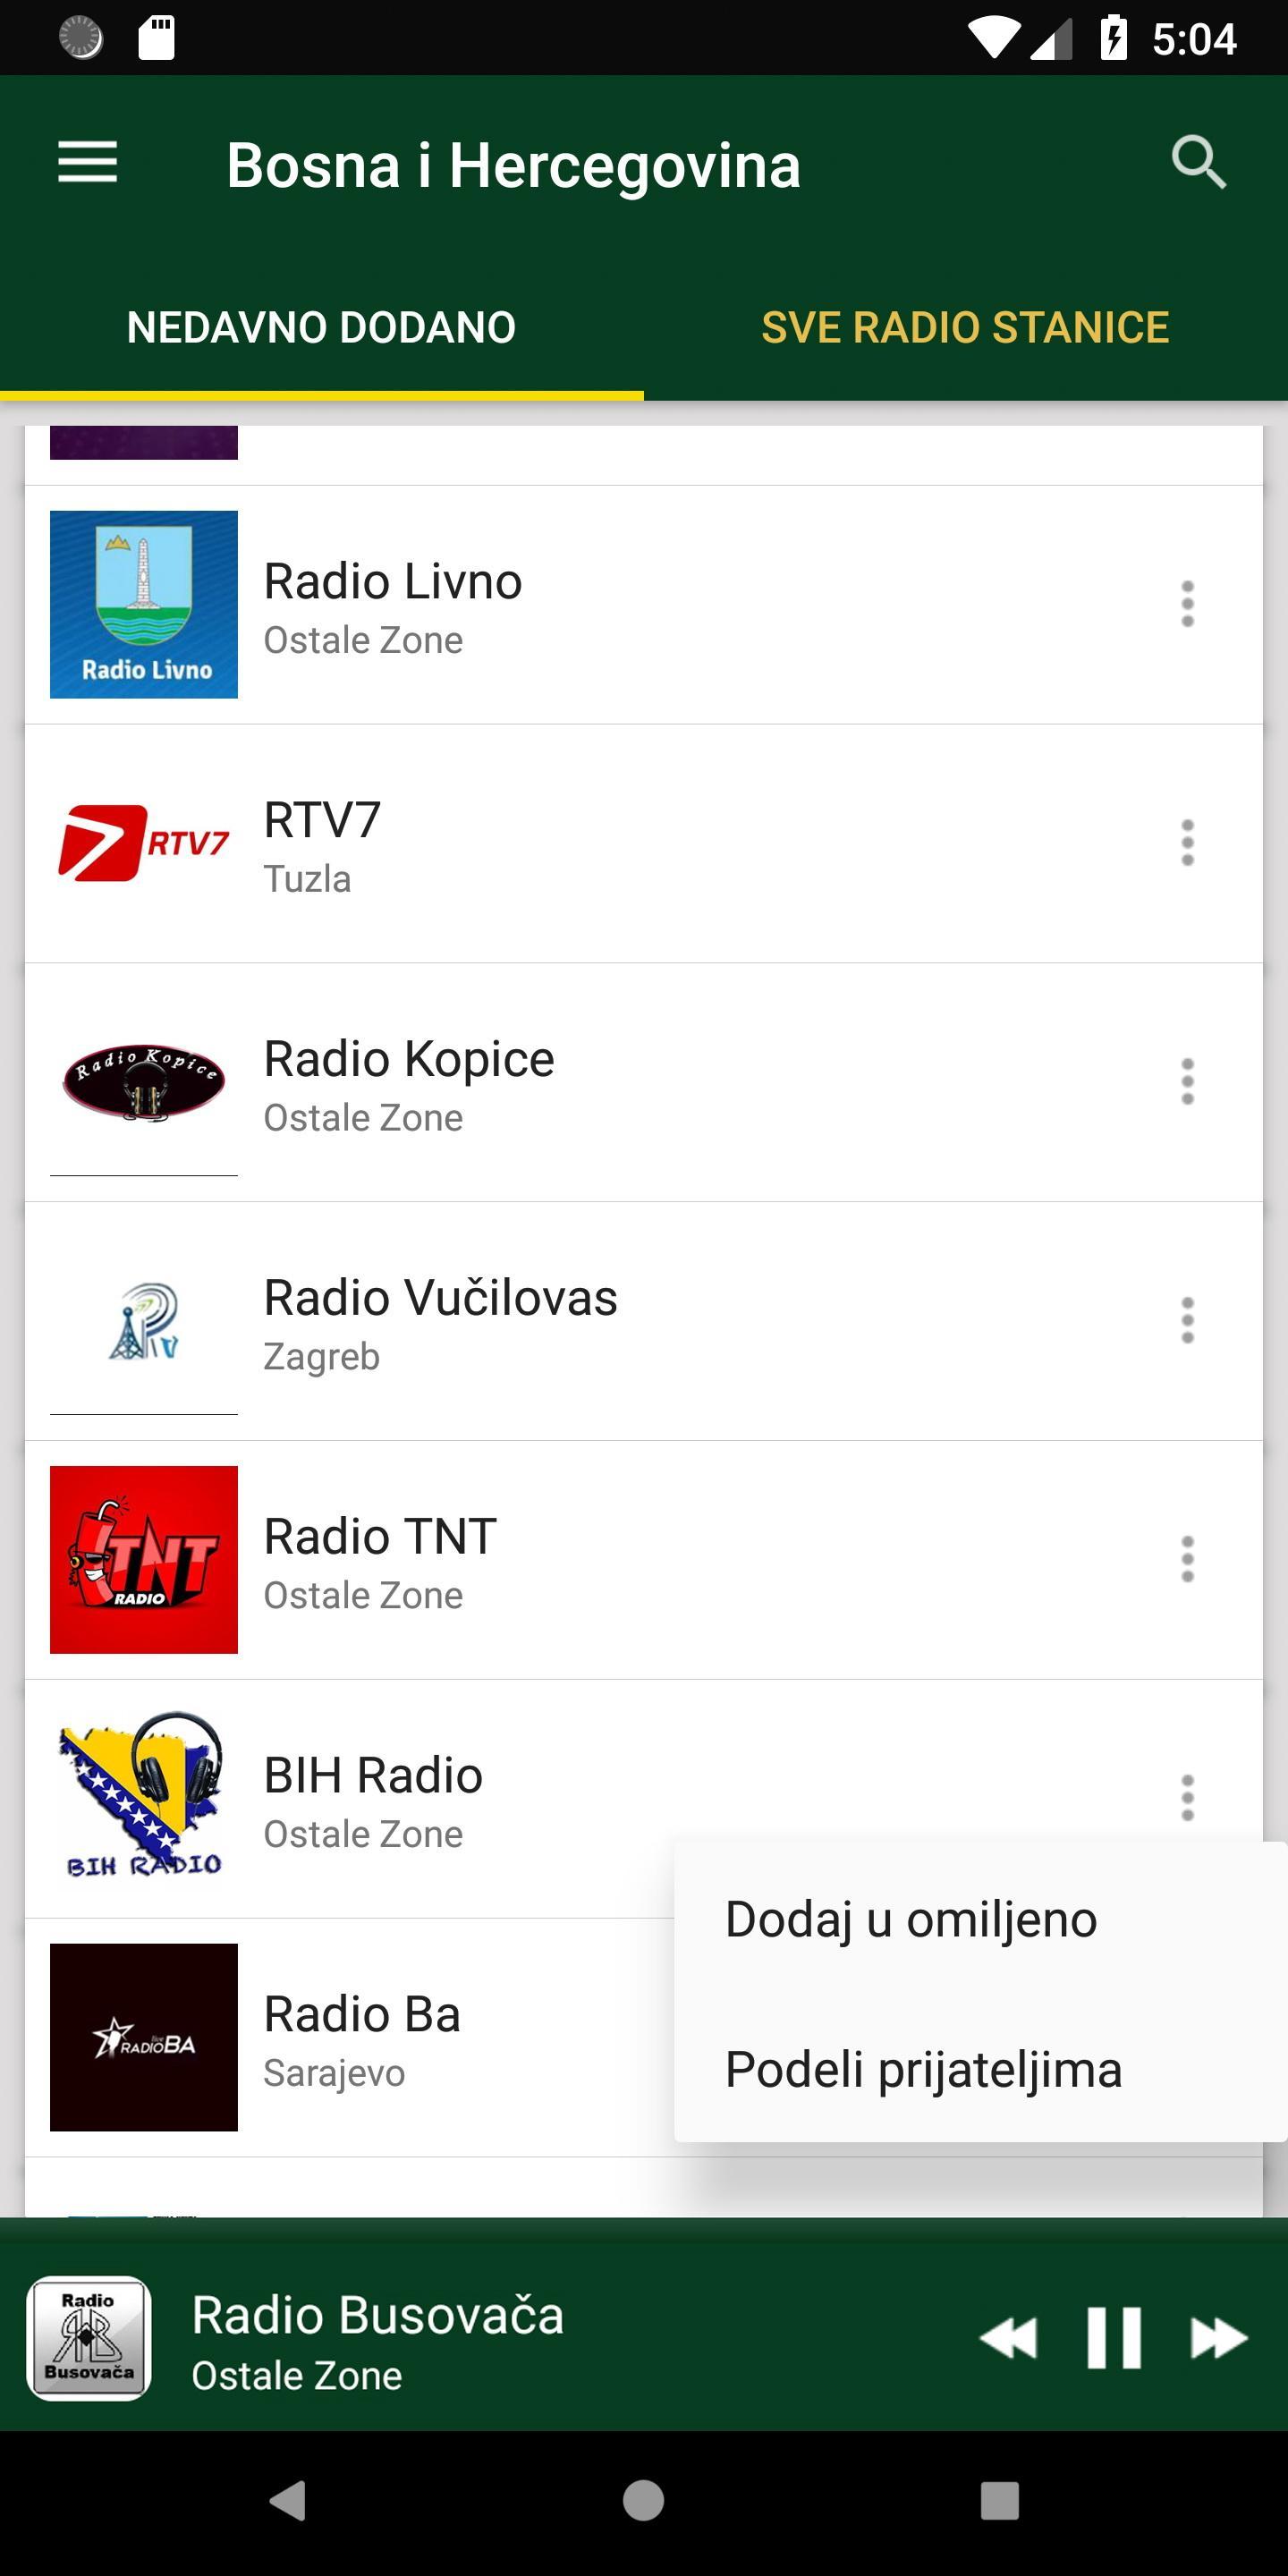 Bosna i Hercegovina Radio Stanice APK pour Android Télécharger